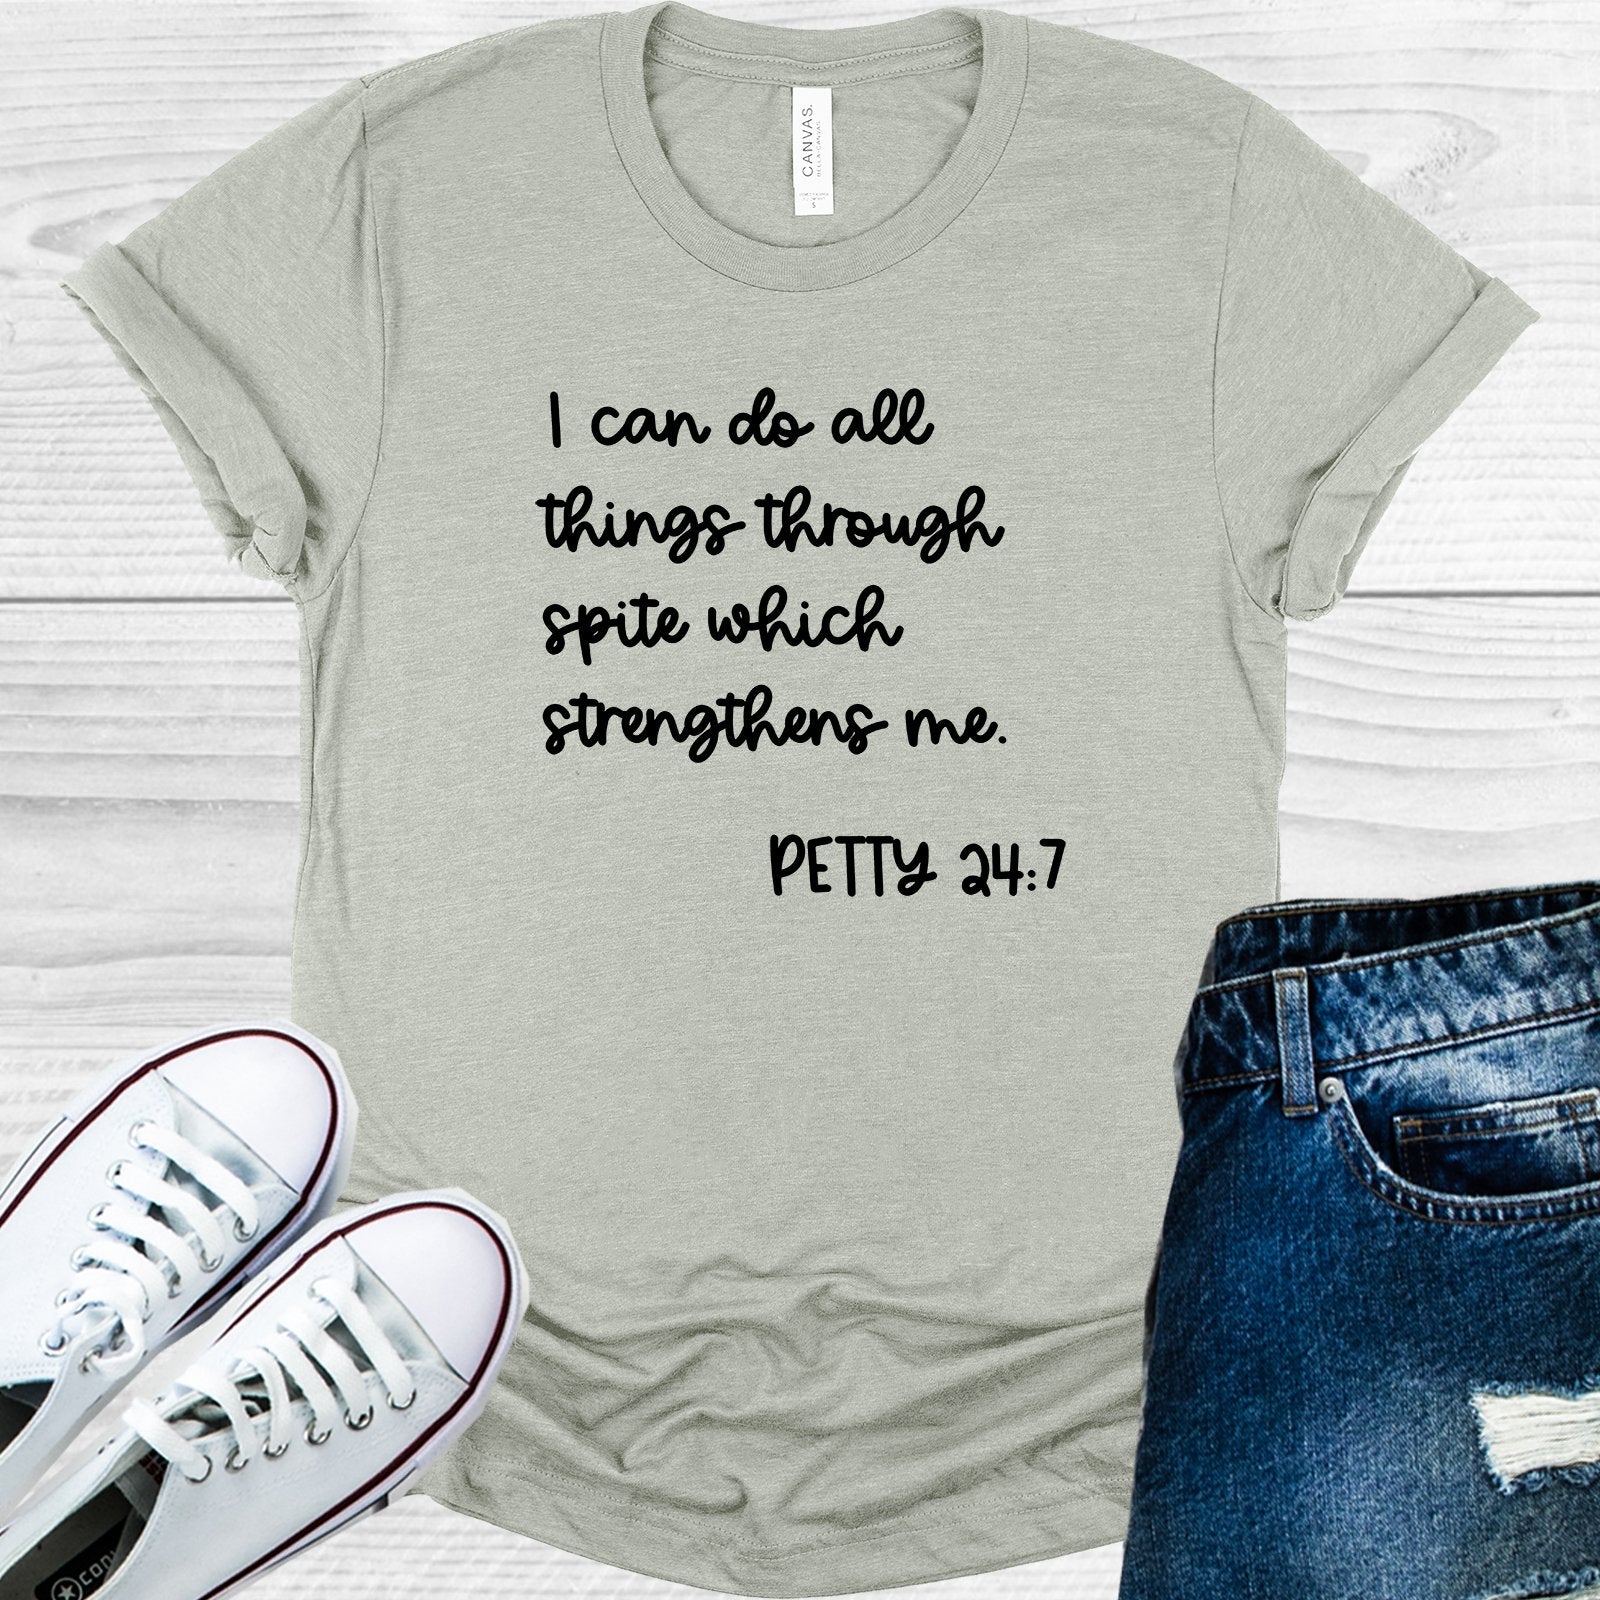 I Can Do All Things Through Spite Which Strengthens Me Petty 24:7 Graphic Tee Graphic Tee